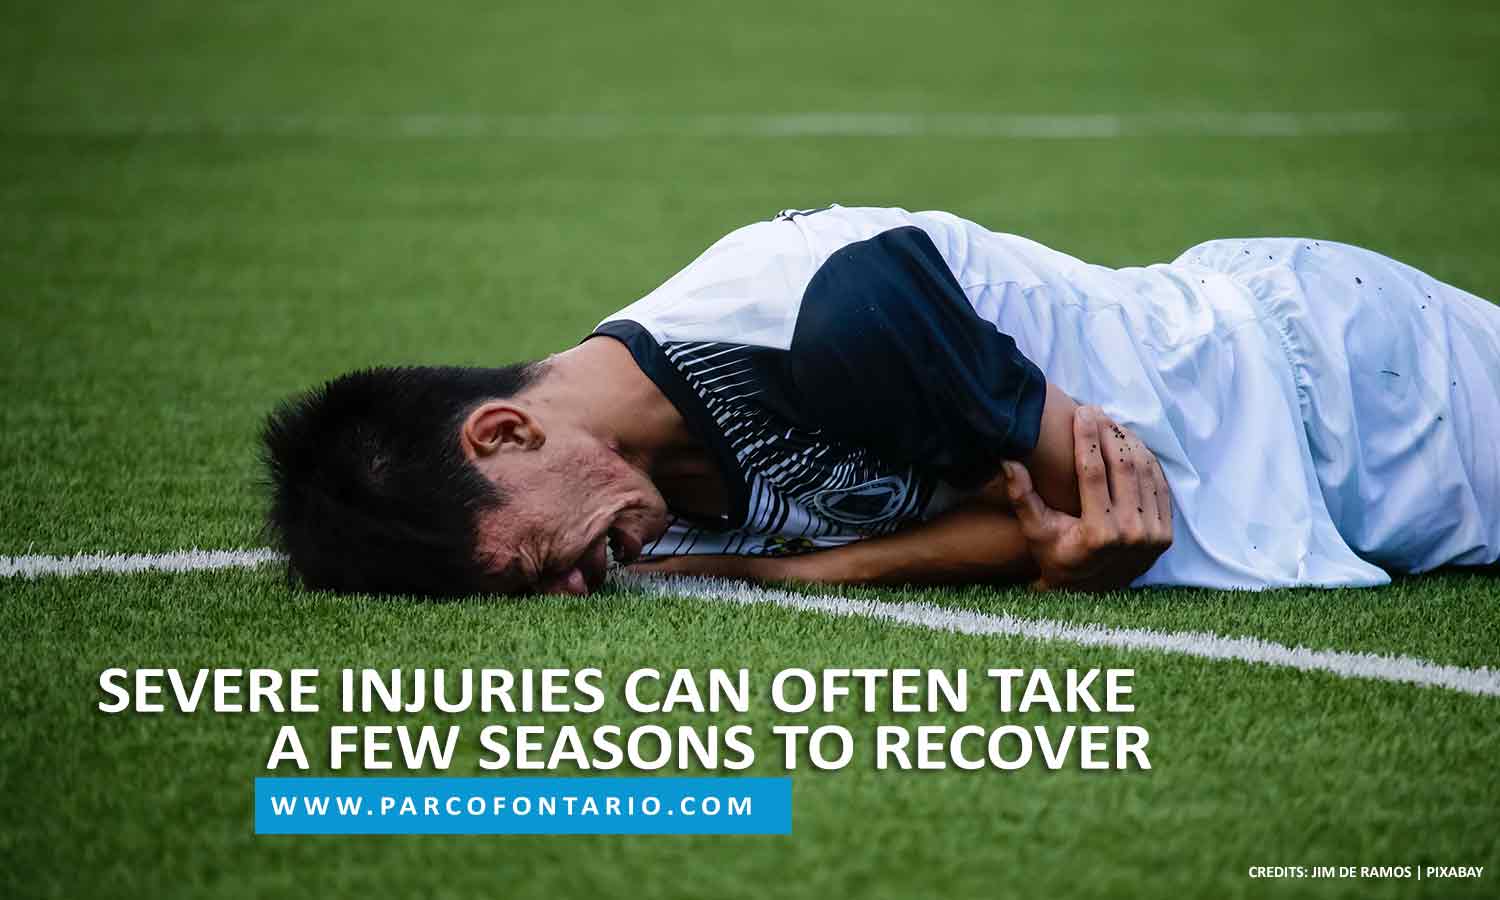 Severe injuries can often take a few seasons